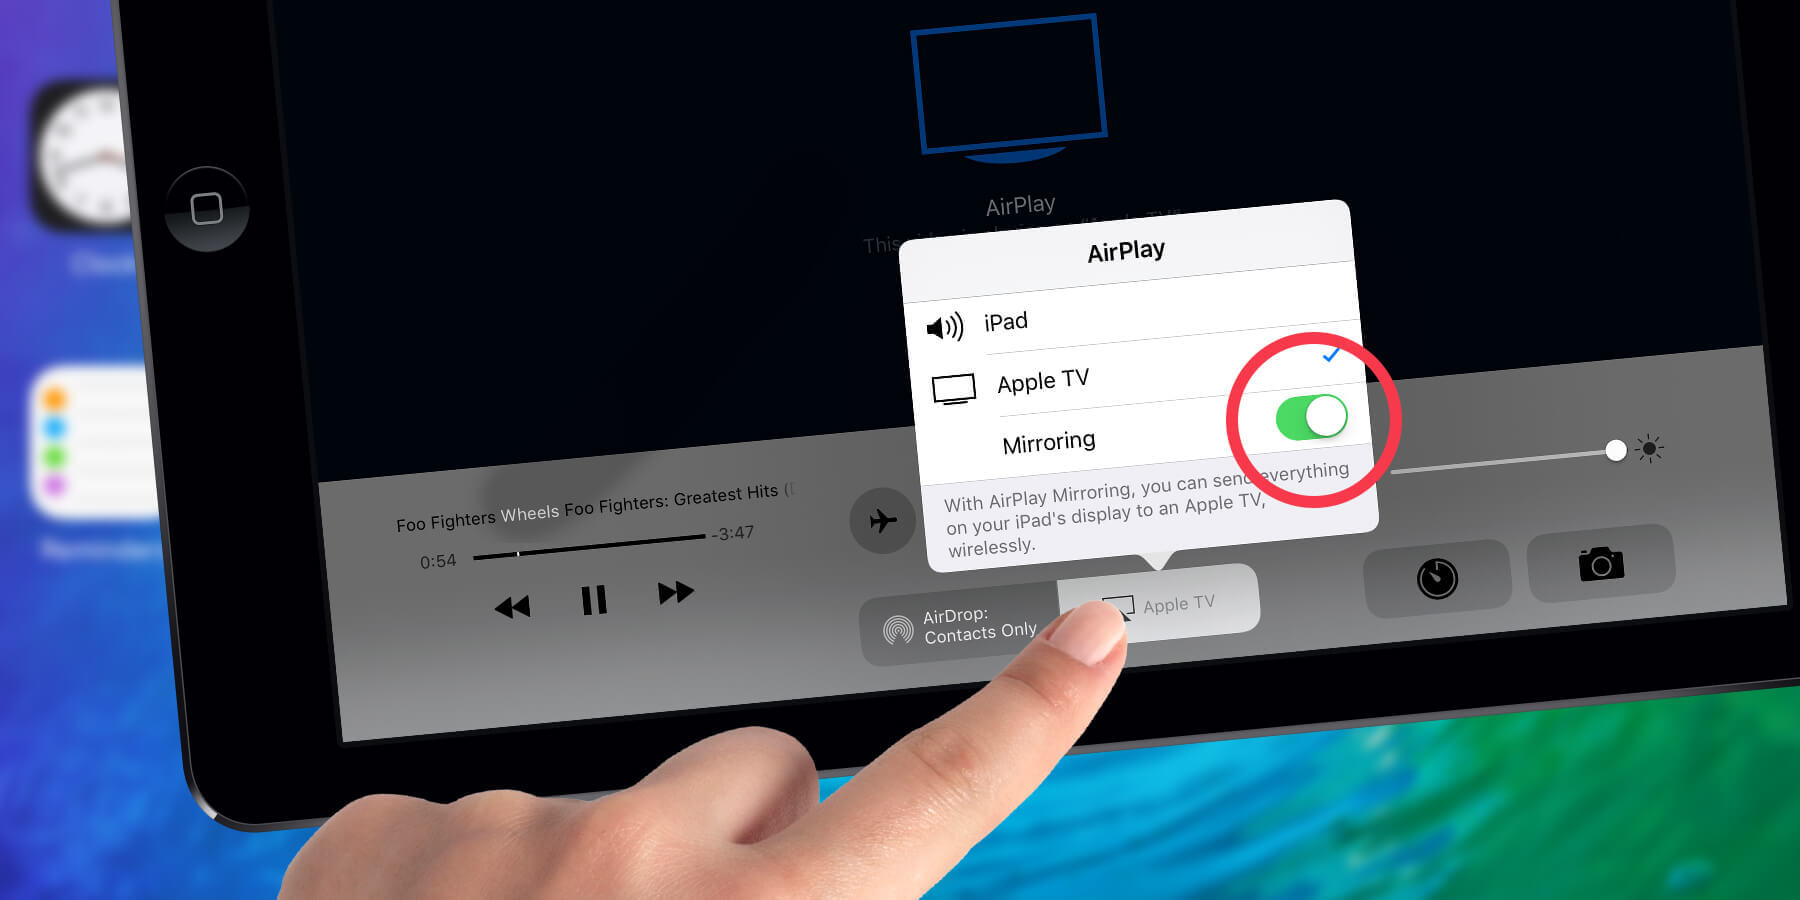 Ios 9 Using Airplay To Mirror An Ipad, How To Delete Screen Mirroring On Ipad